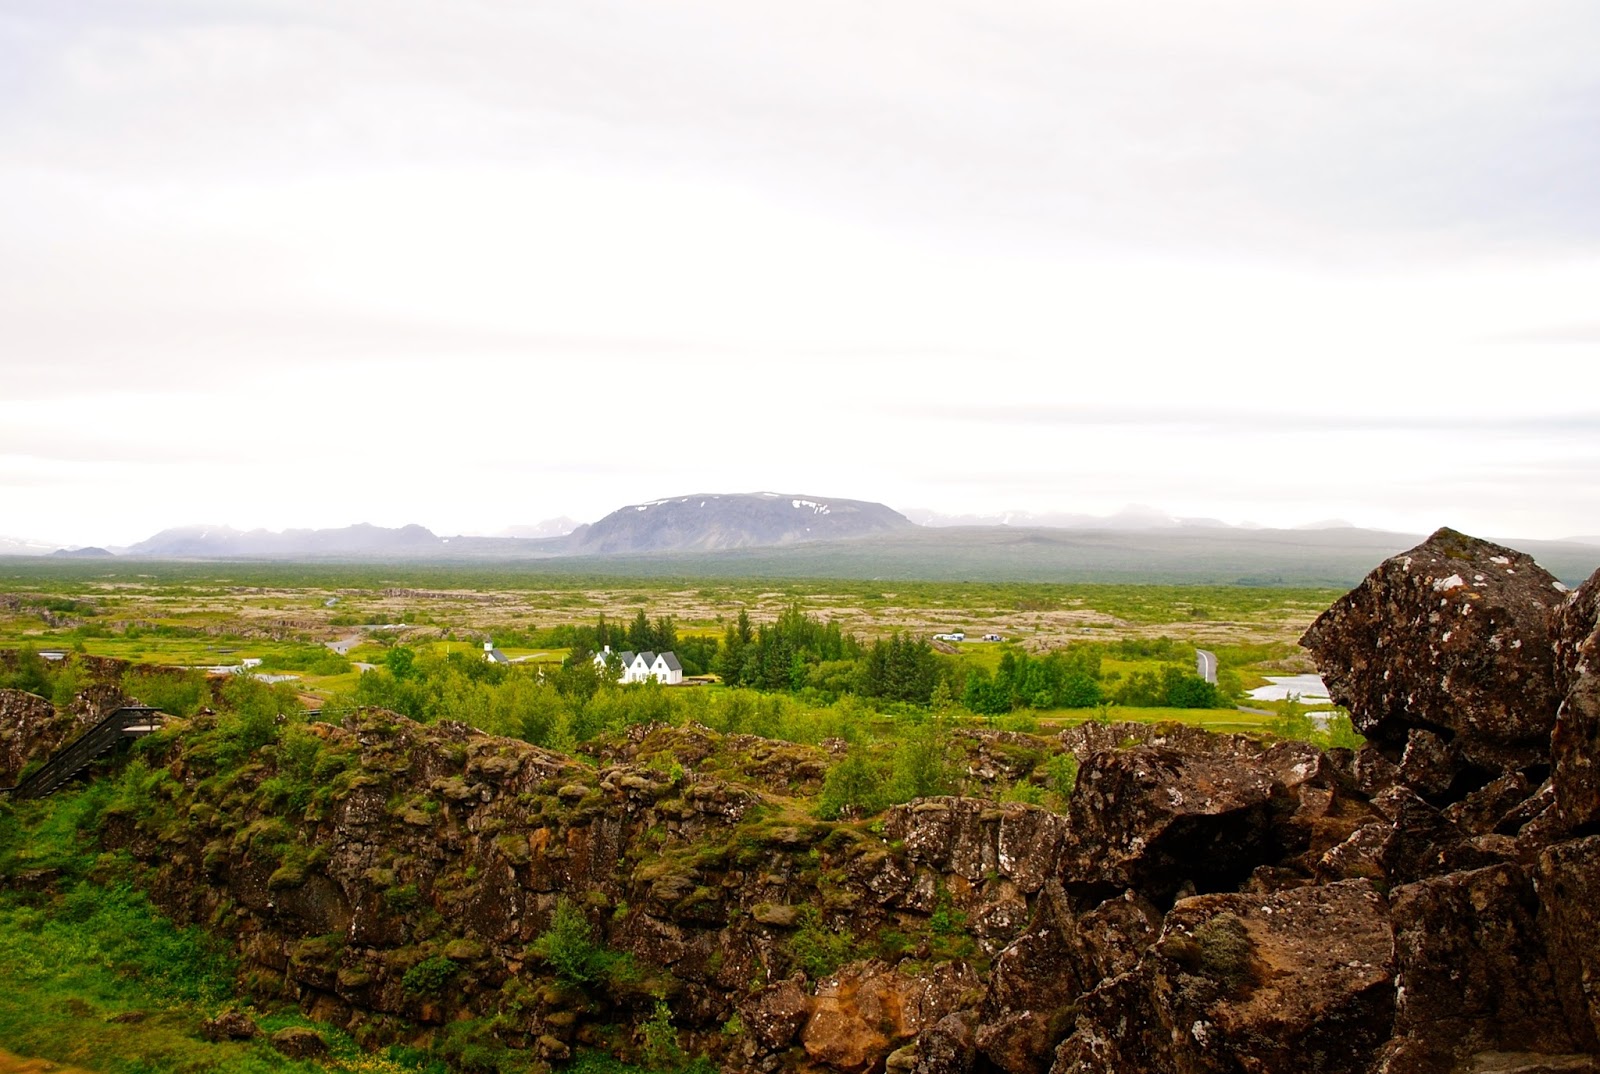 Things to do in Reykjavik Iceland : Find your dream home in the Icelandic wilderness